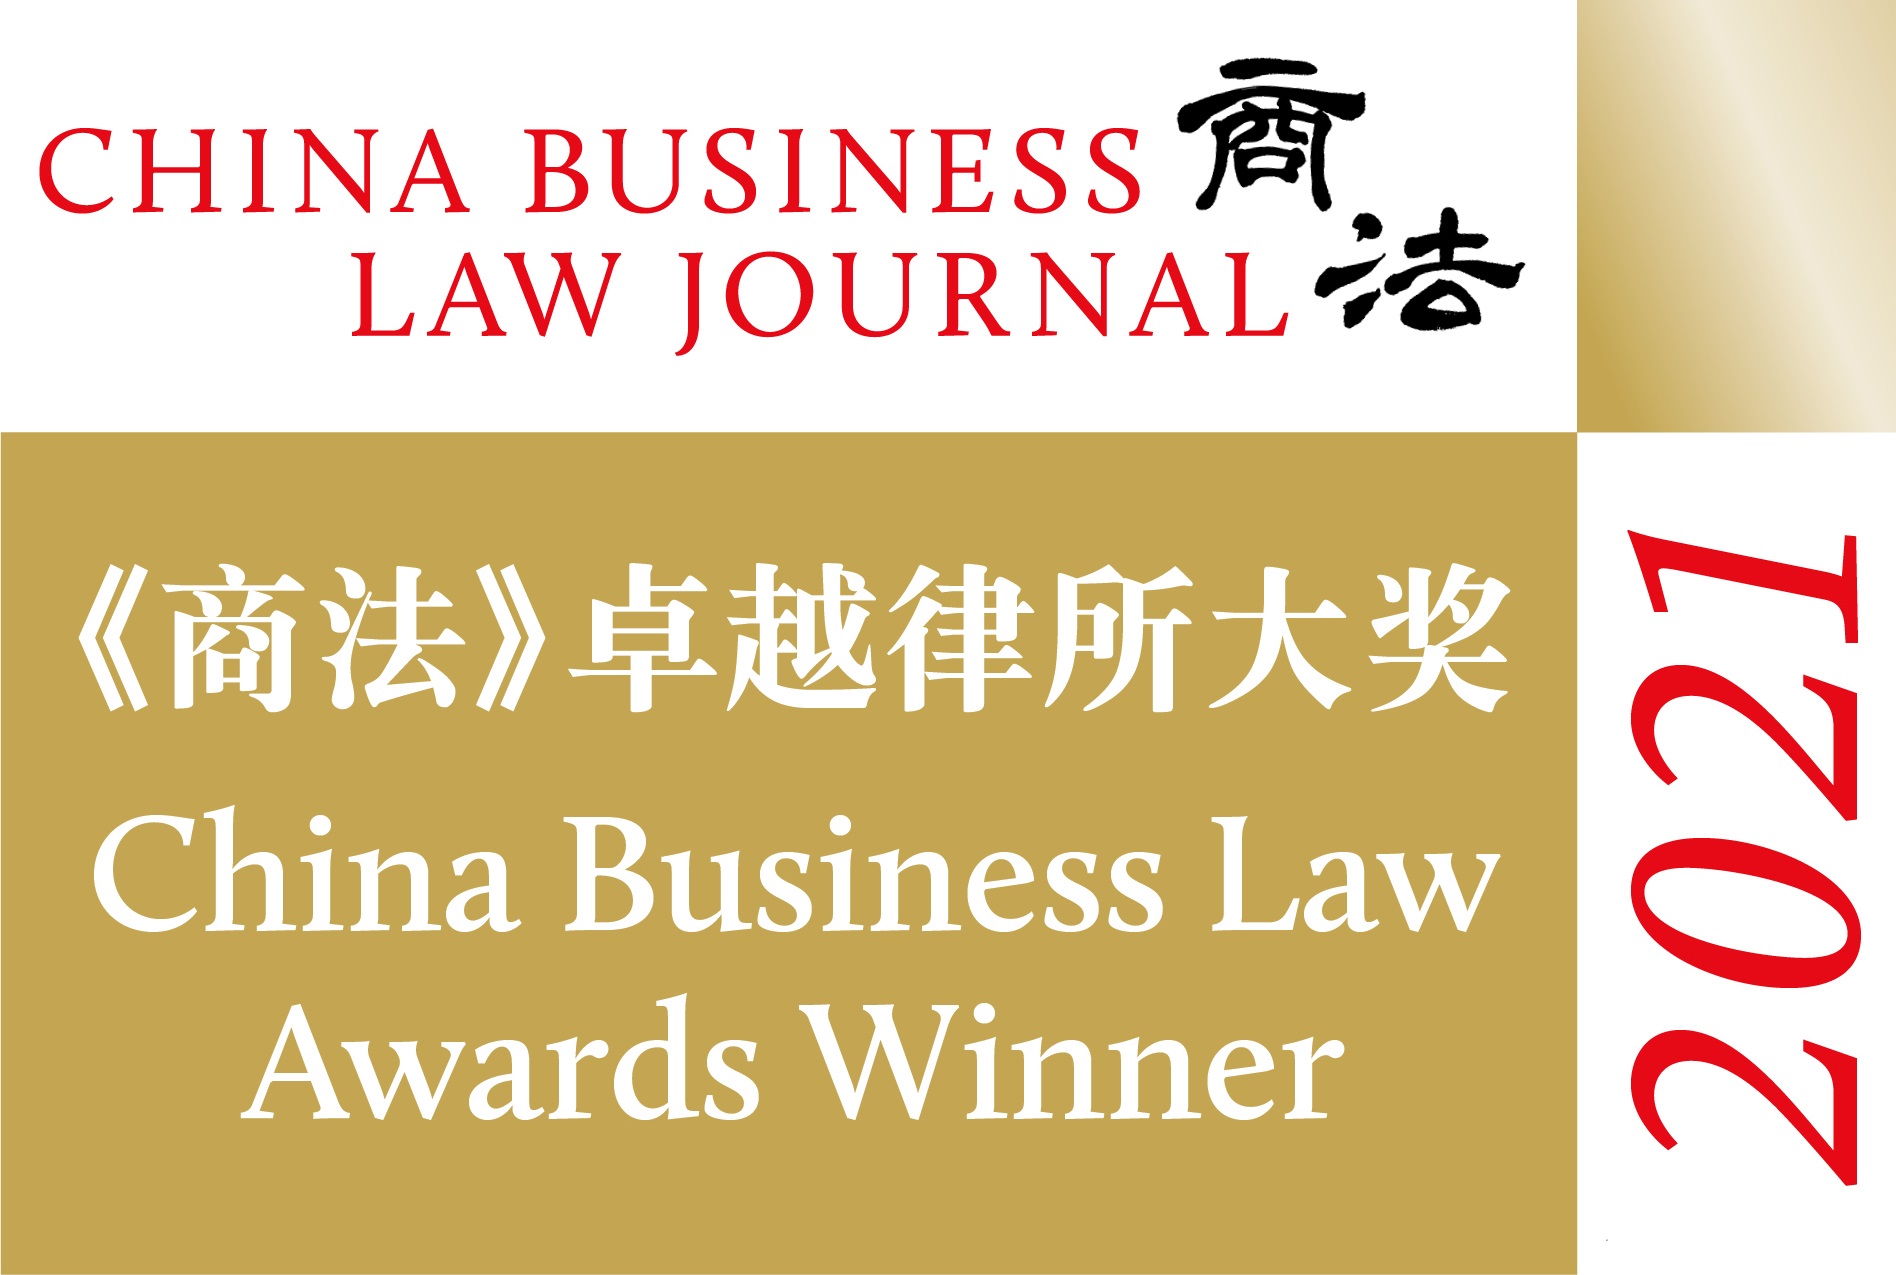 China Business Law Firm in Pro-bono, Technology & telecom by China Business Law Journal, 2021